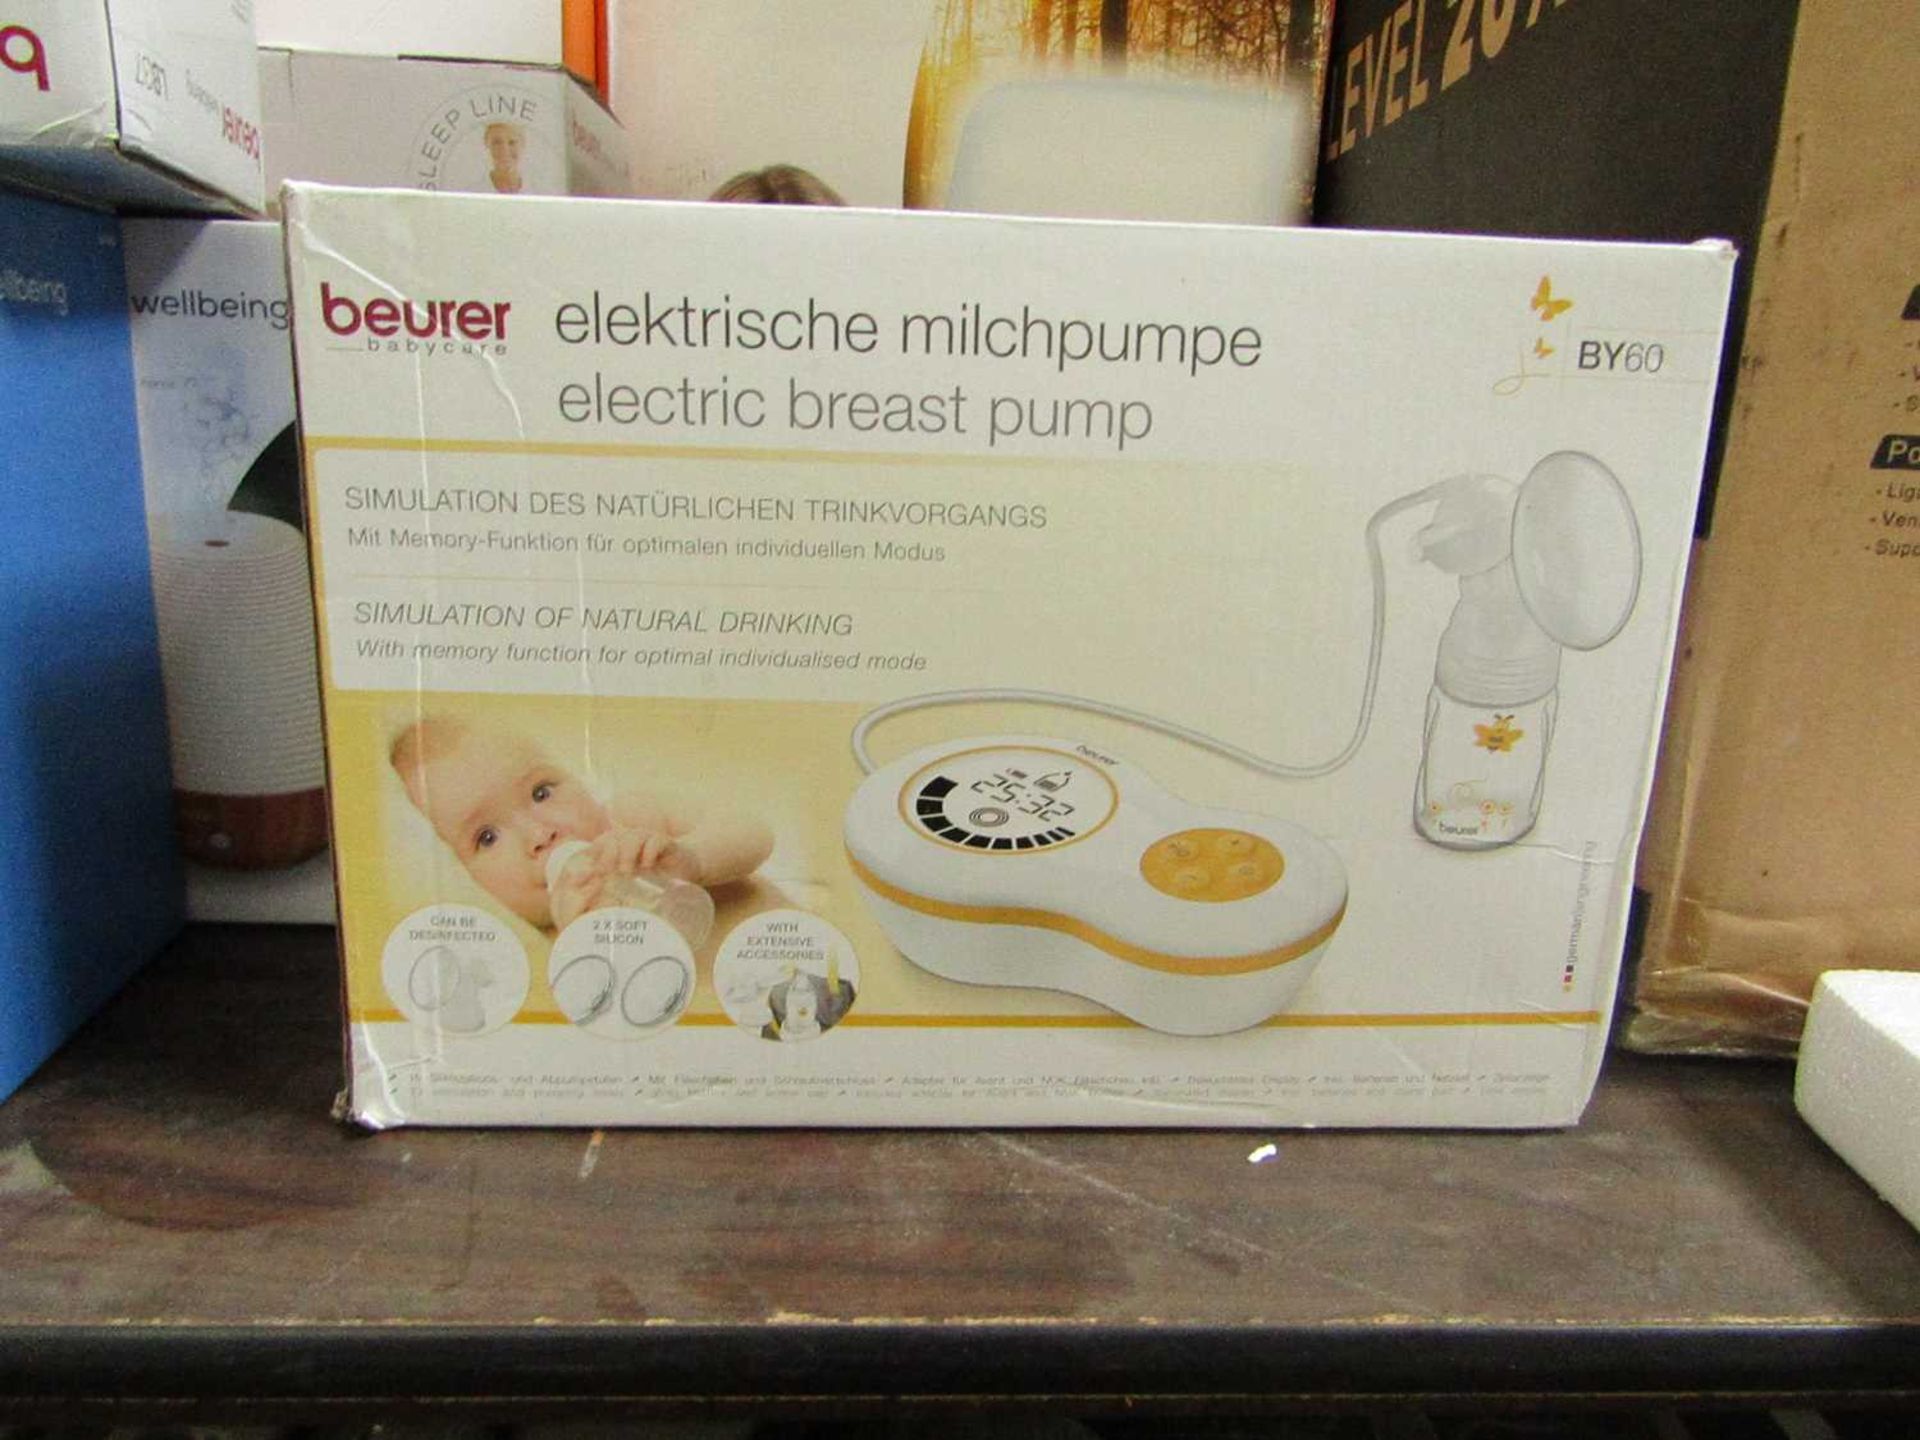 1x Beurer Electric Breast Pump BY60- This item is graded B - RRP £130